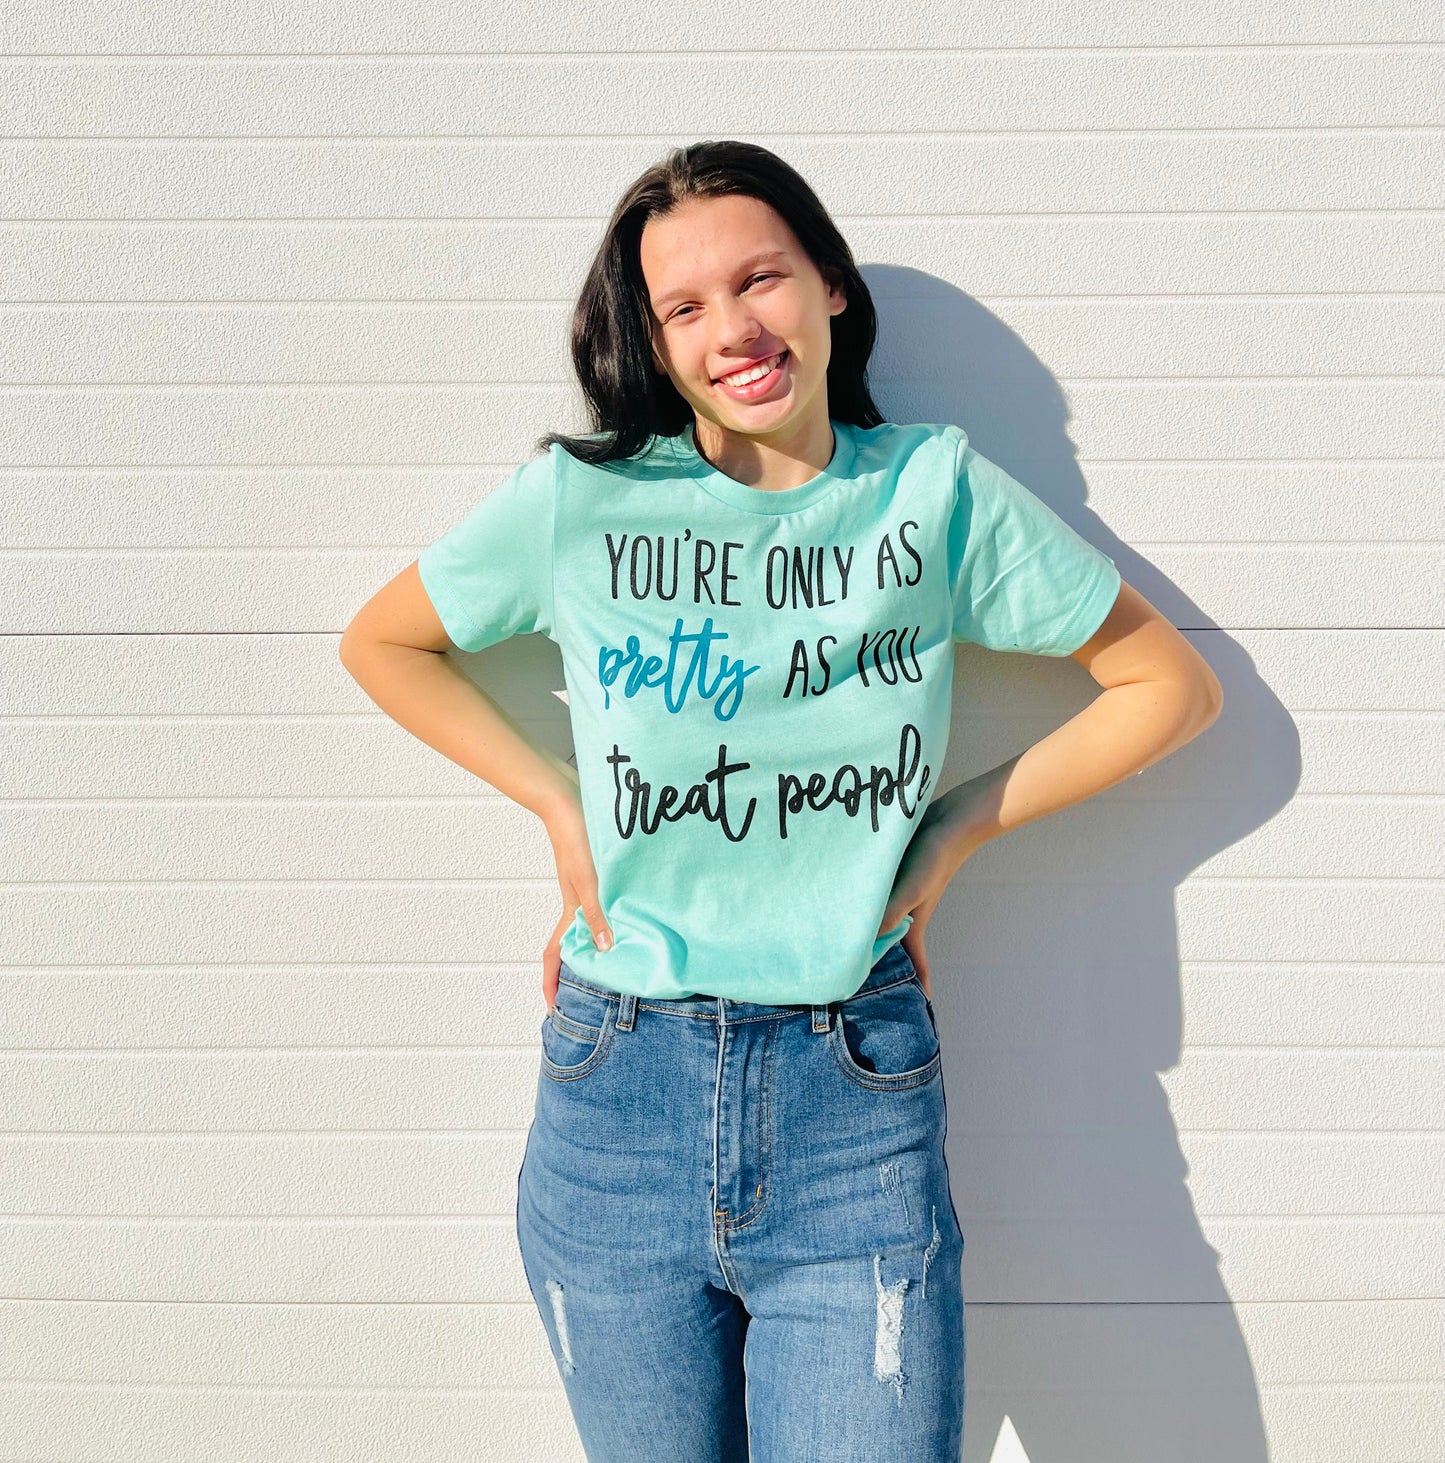 MINT ELEPHANT- "You're only as pretty as you treat people" Graphic Tee